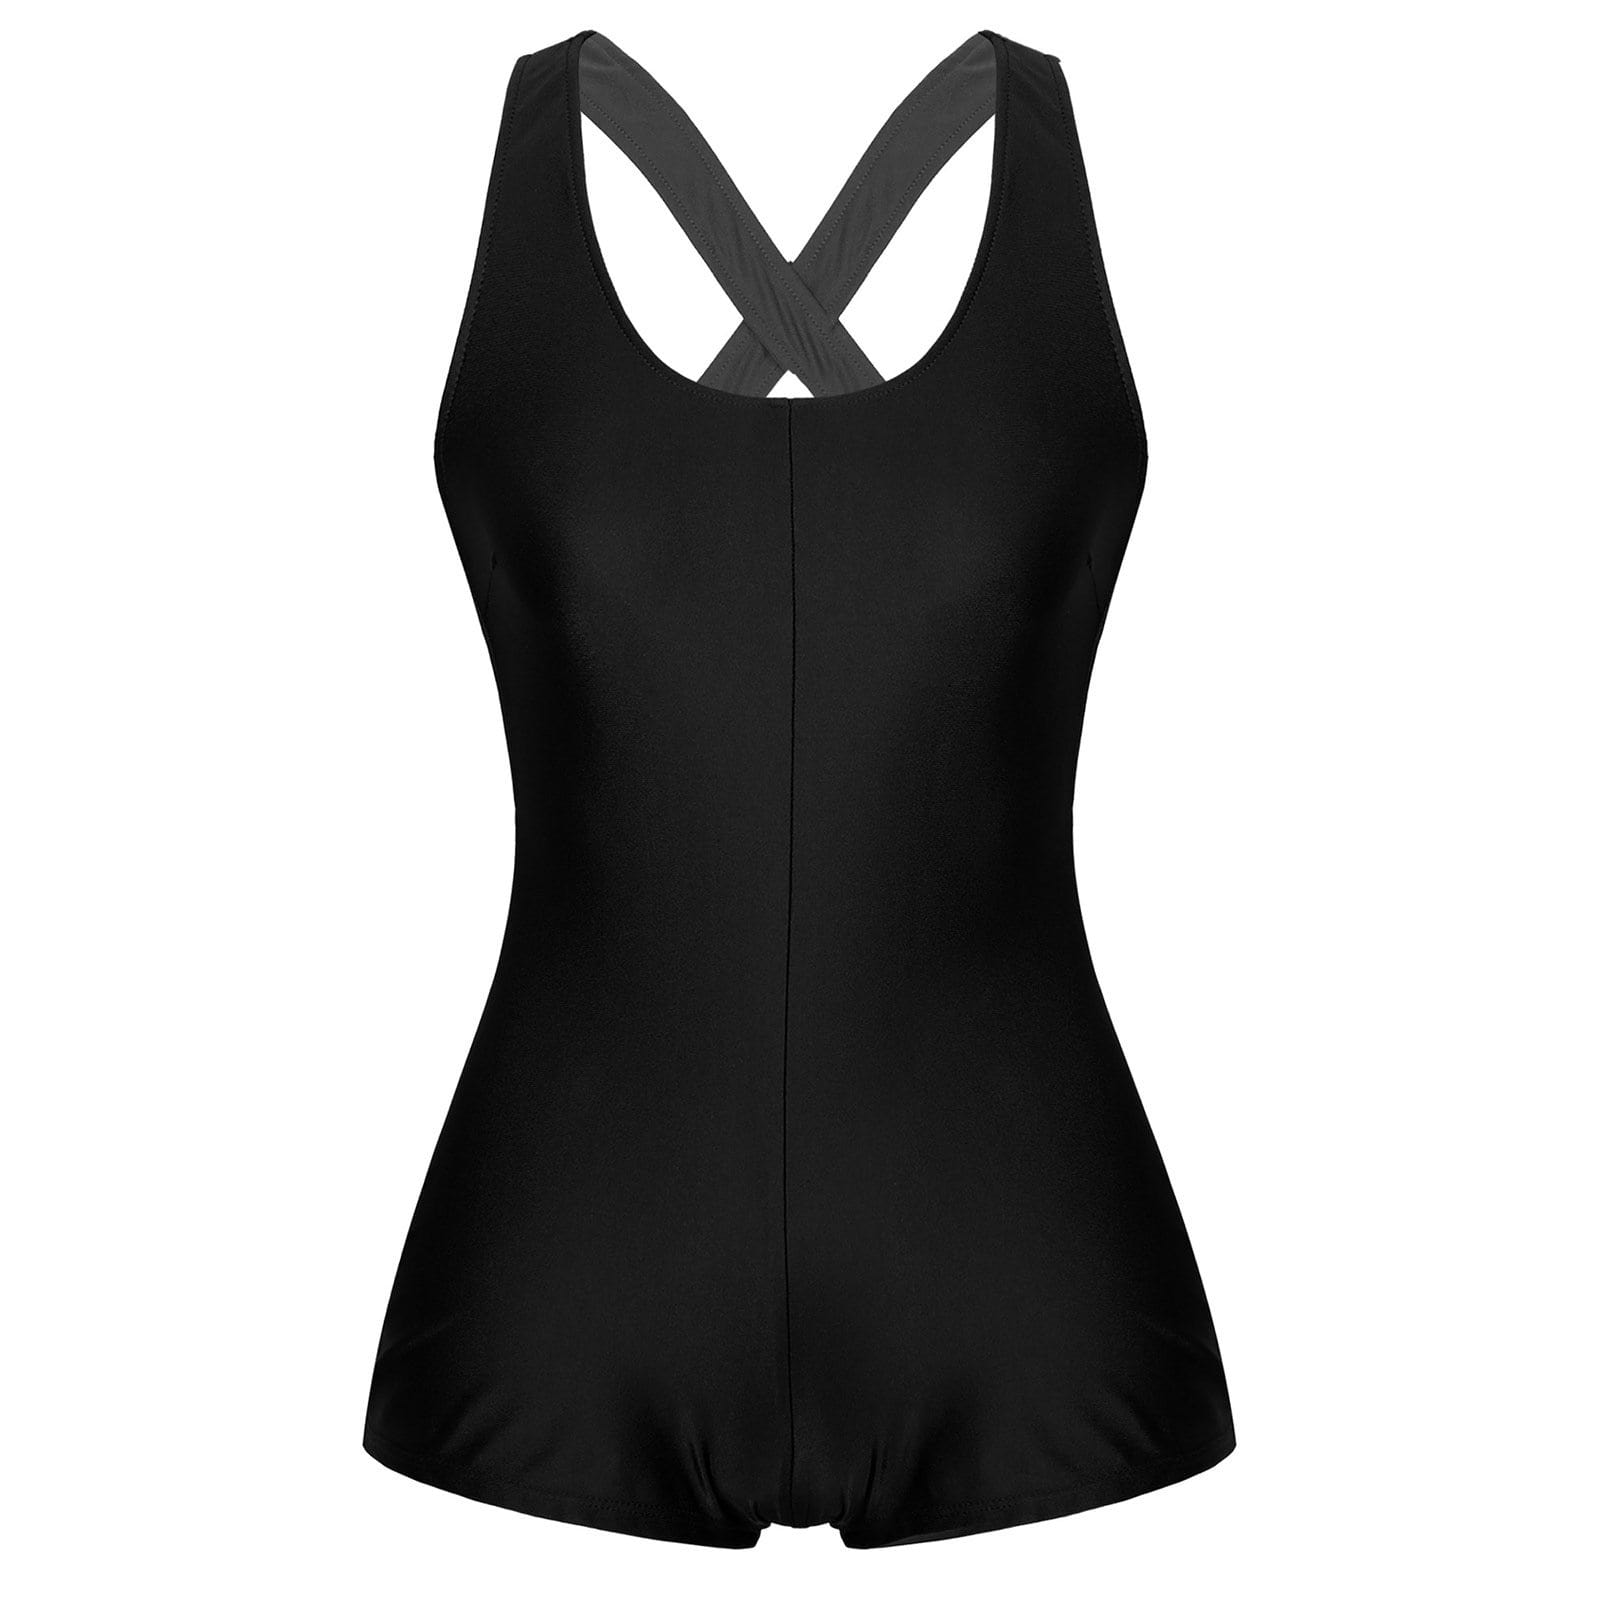 Kinky Cloth 201531501 Black / S Back Hollow Out Fitness Bodysuit